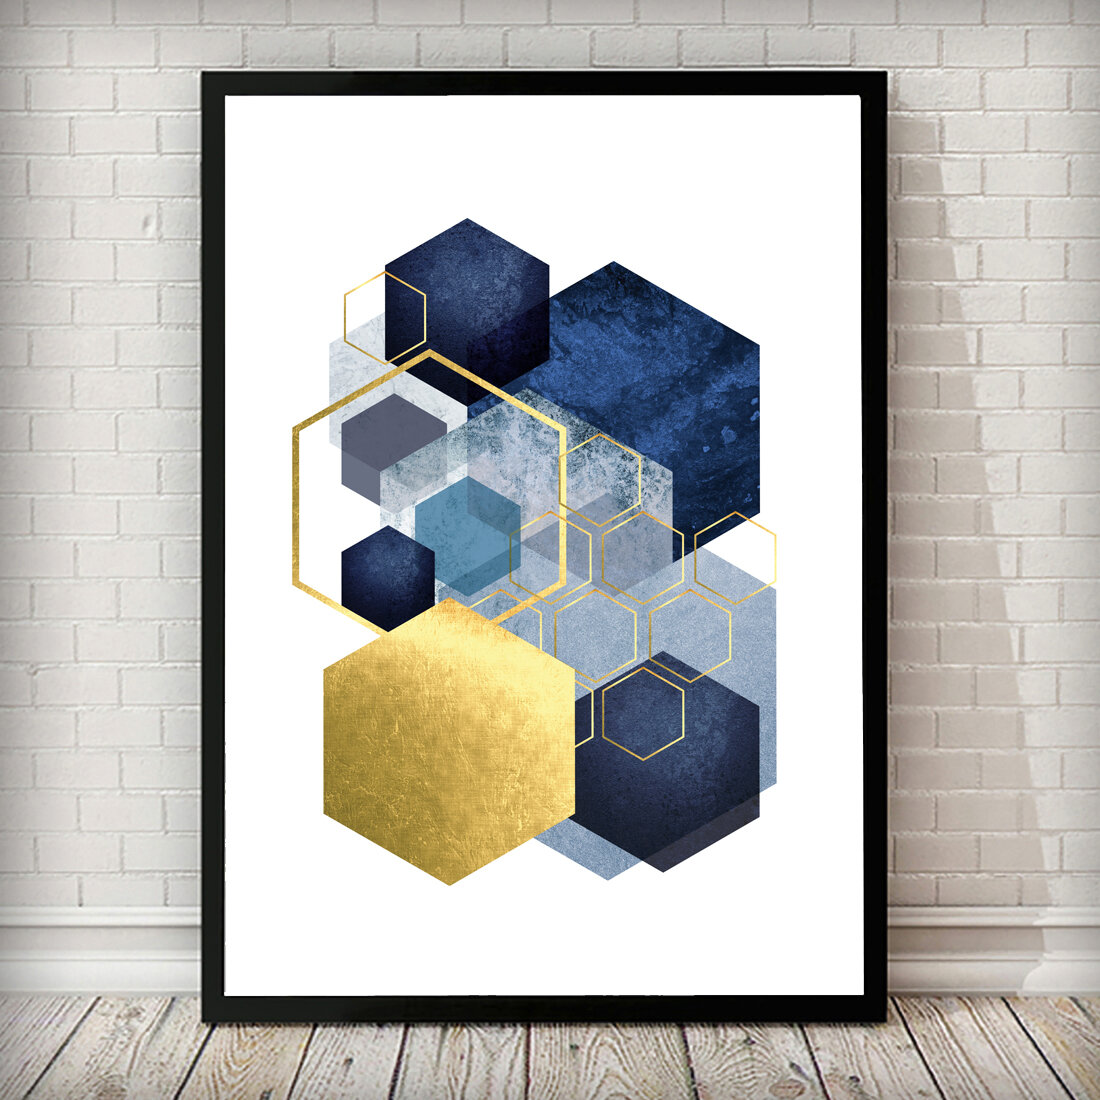 East Urban Home Geometric Hexagon Navy Gold Grey Abstract Picture Frame Print On Paper Reviews Wayfair Co Uk